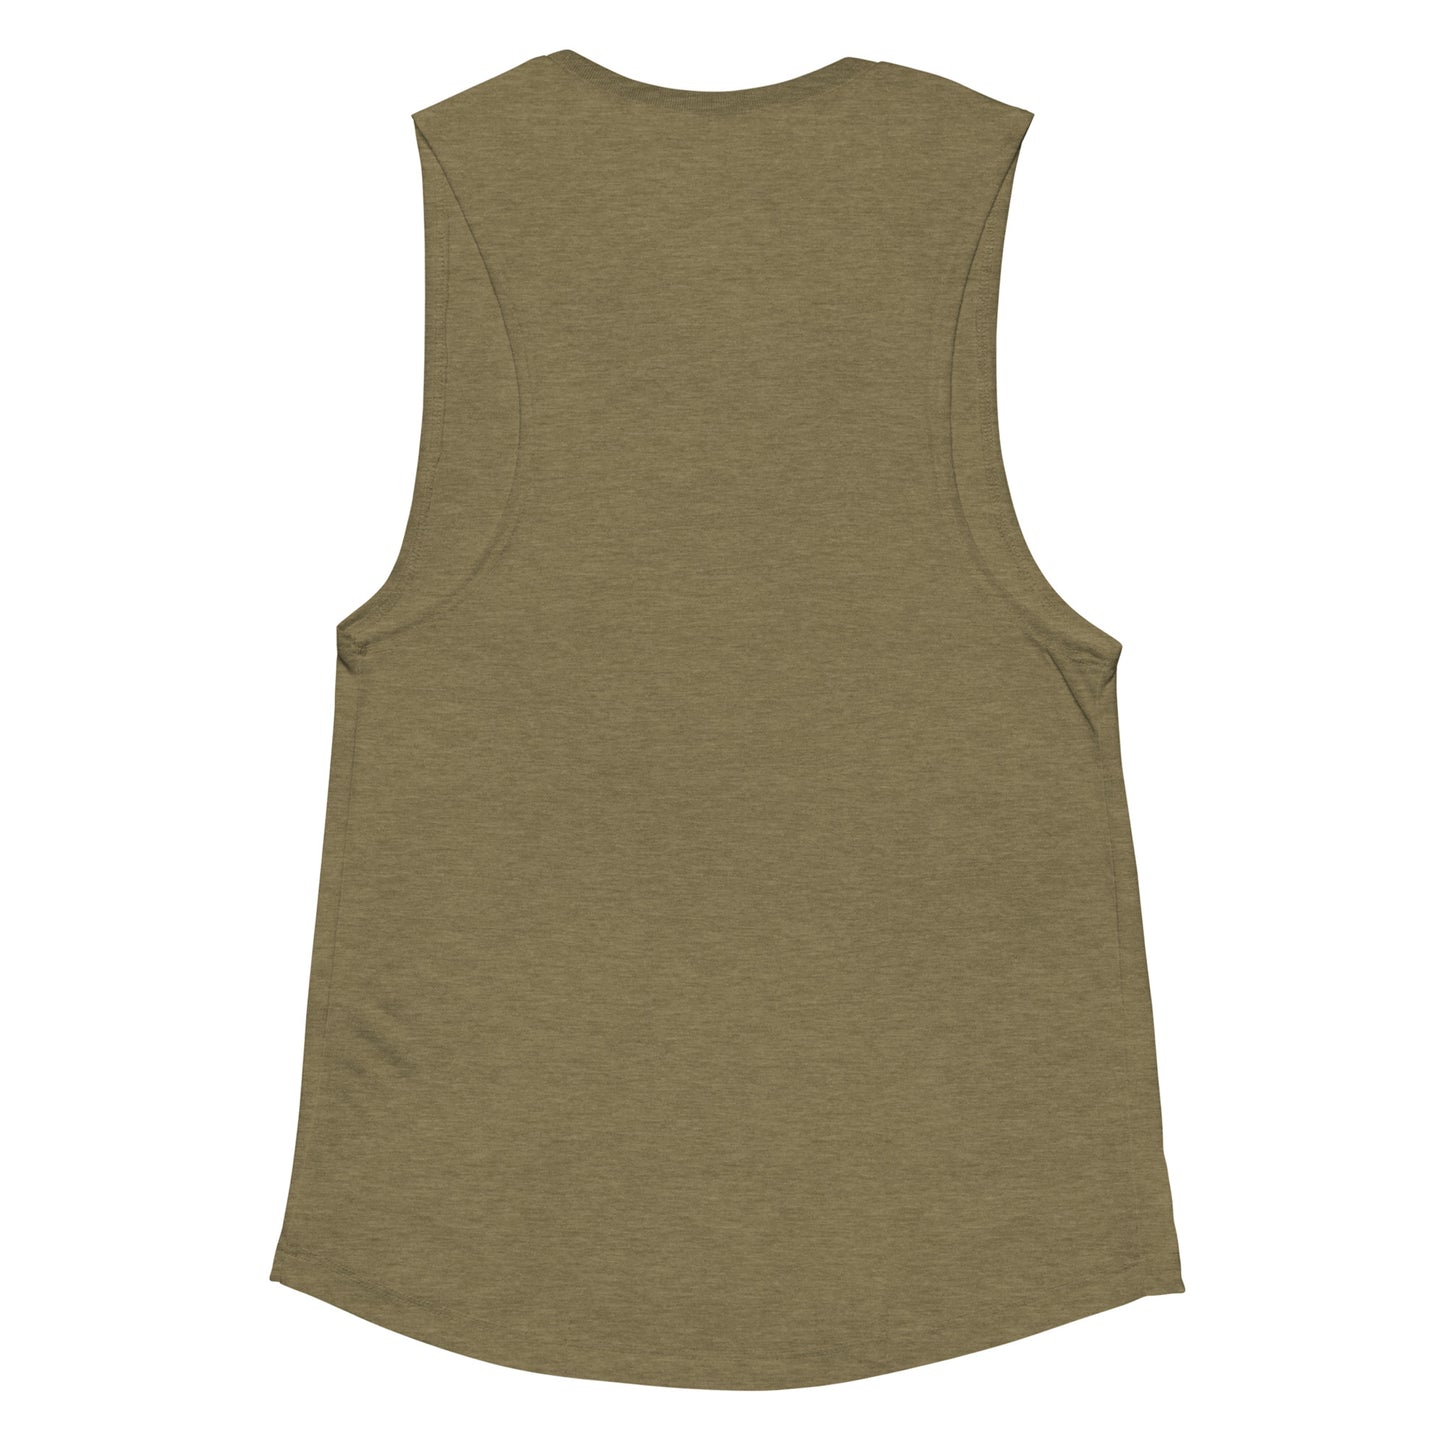 apparently, I'm an adult. muscle tank (women's cut)